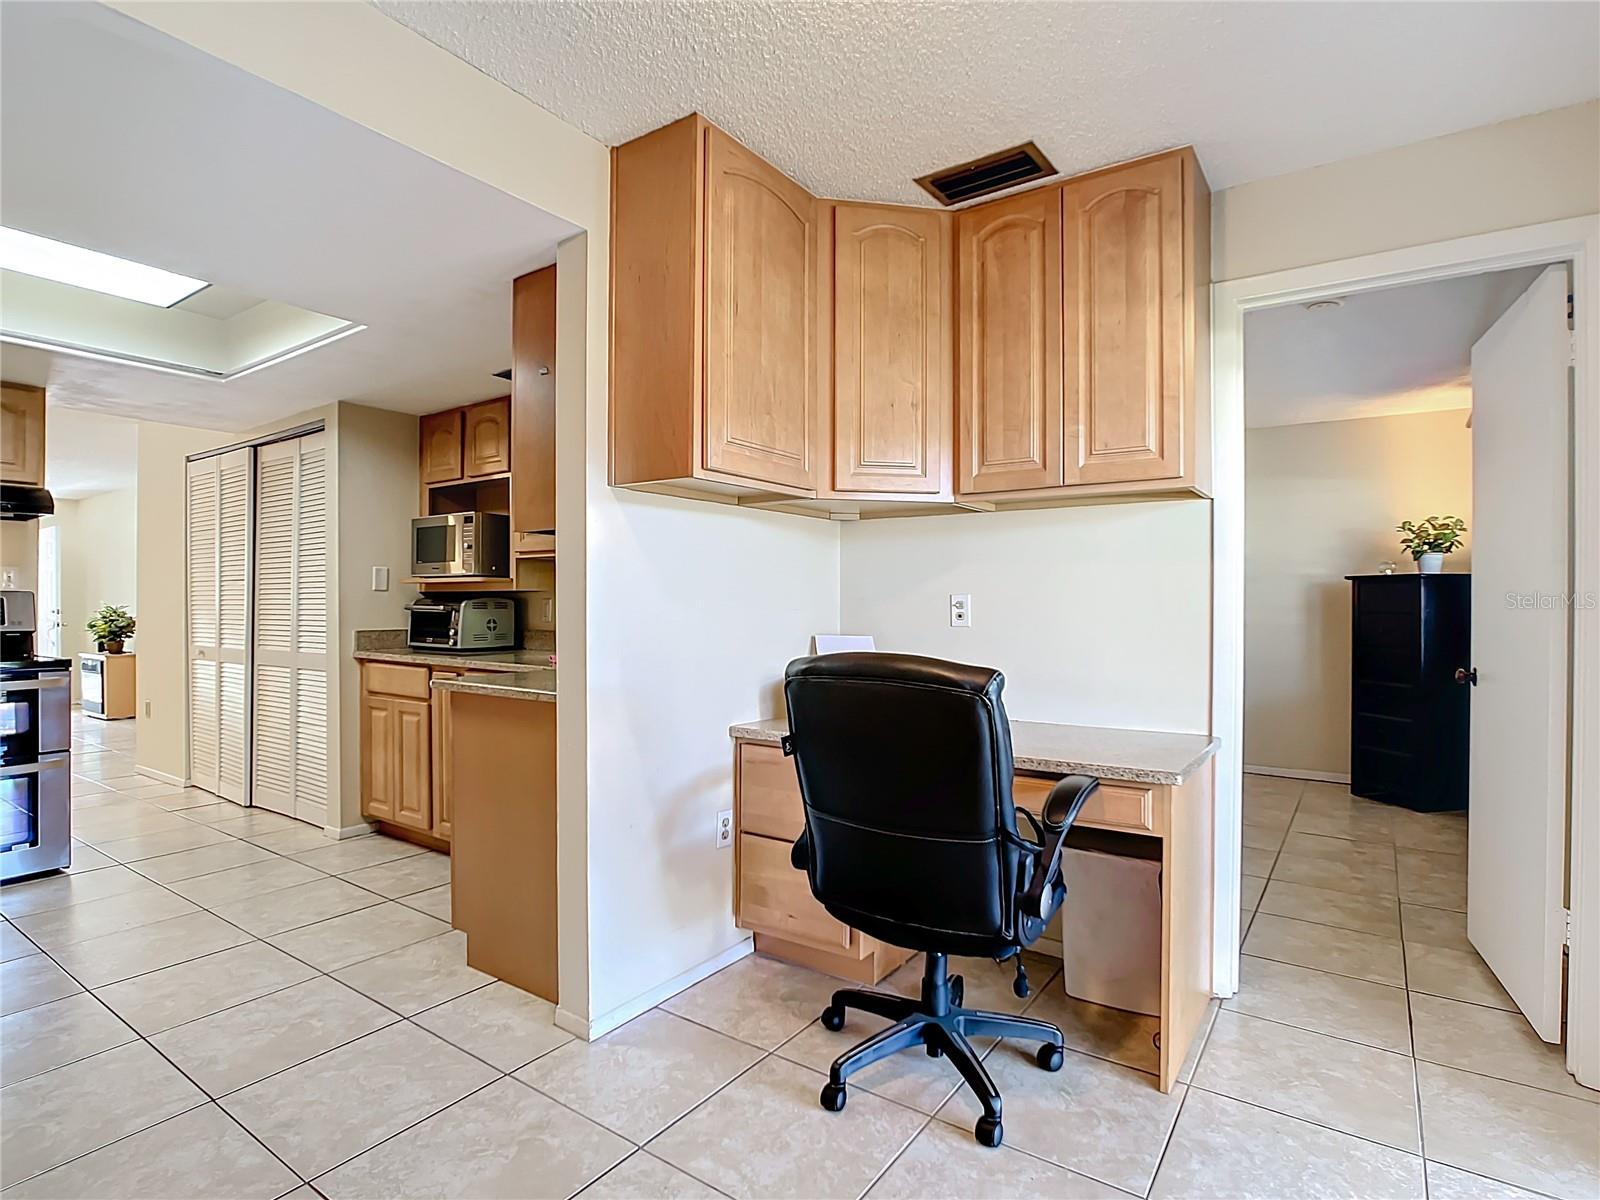 Office with wood cabinets and granite desk top - matches kitchen